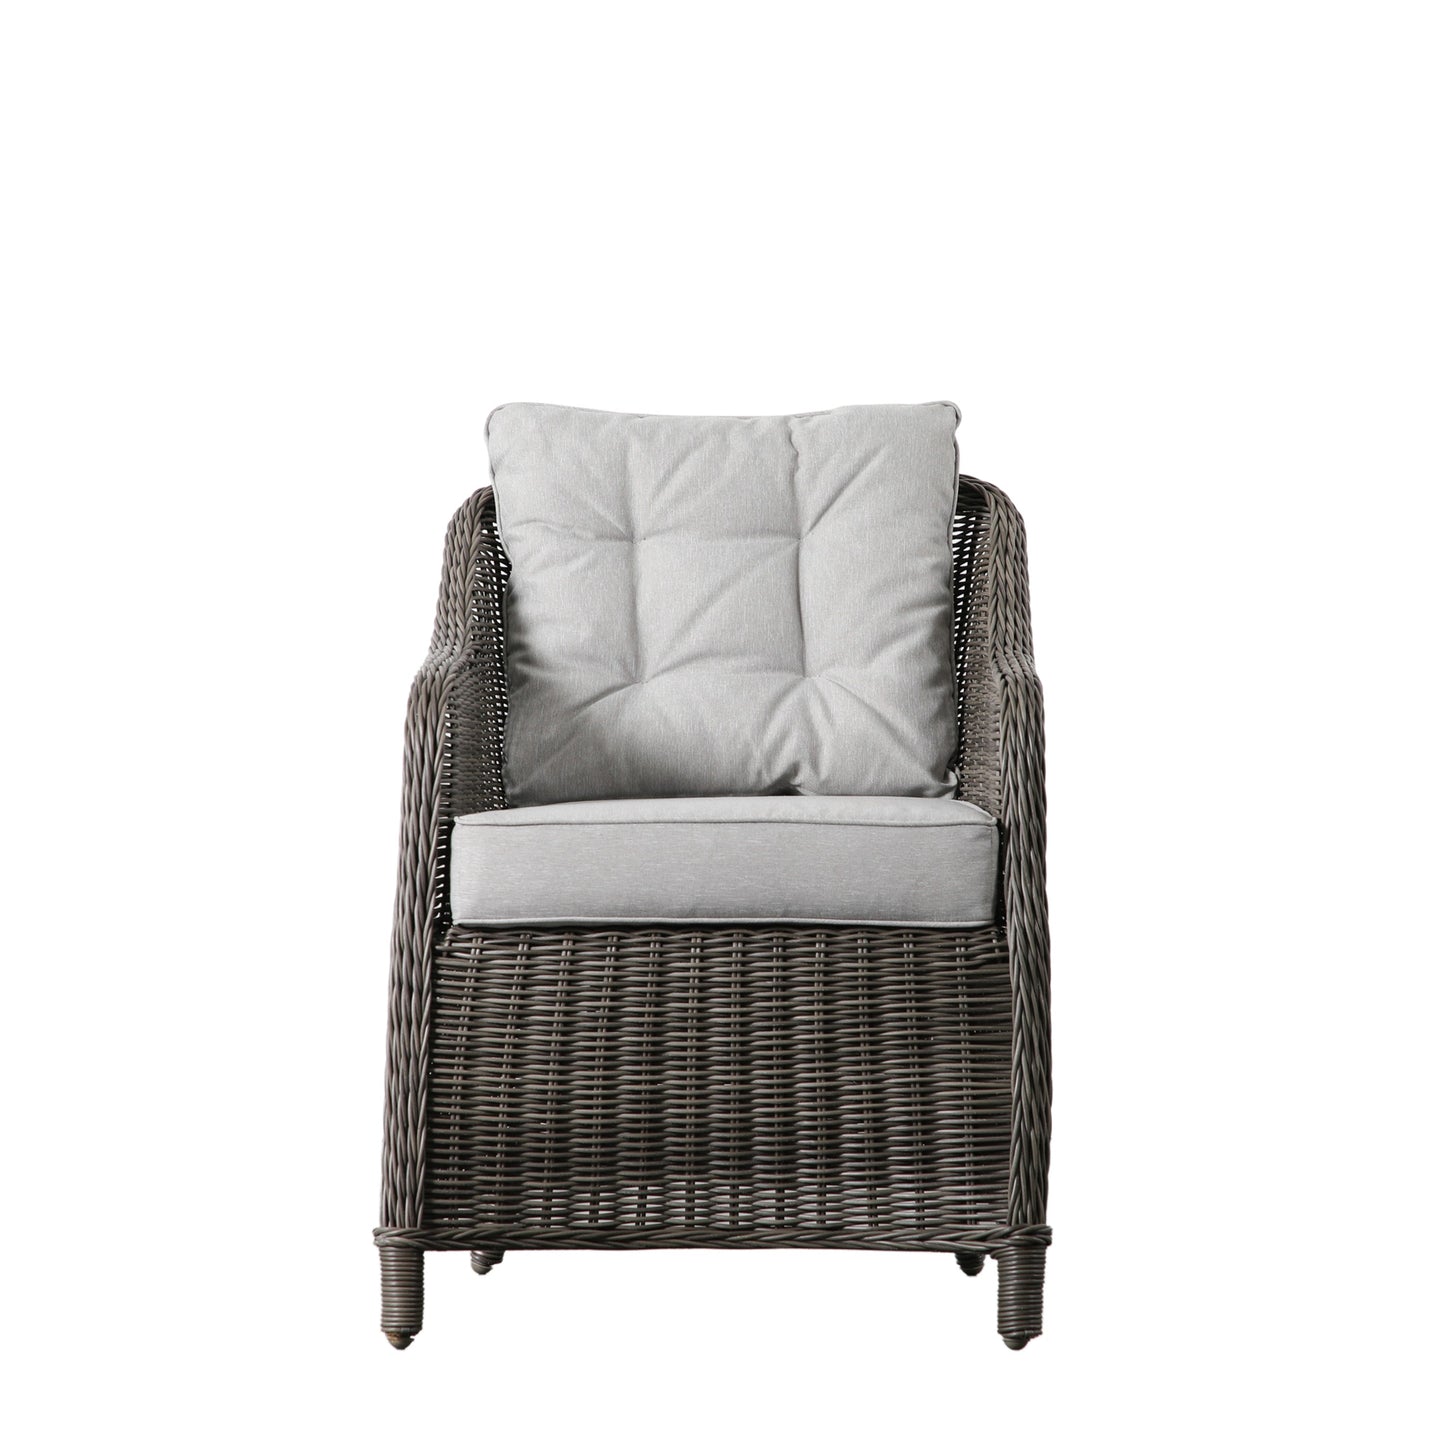 An Abbey Dining Chair (2pk) Grey with white cushion - ideal home furniture for enhancing interior decor.